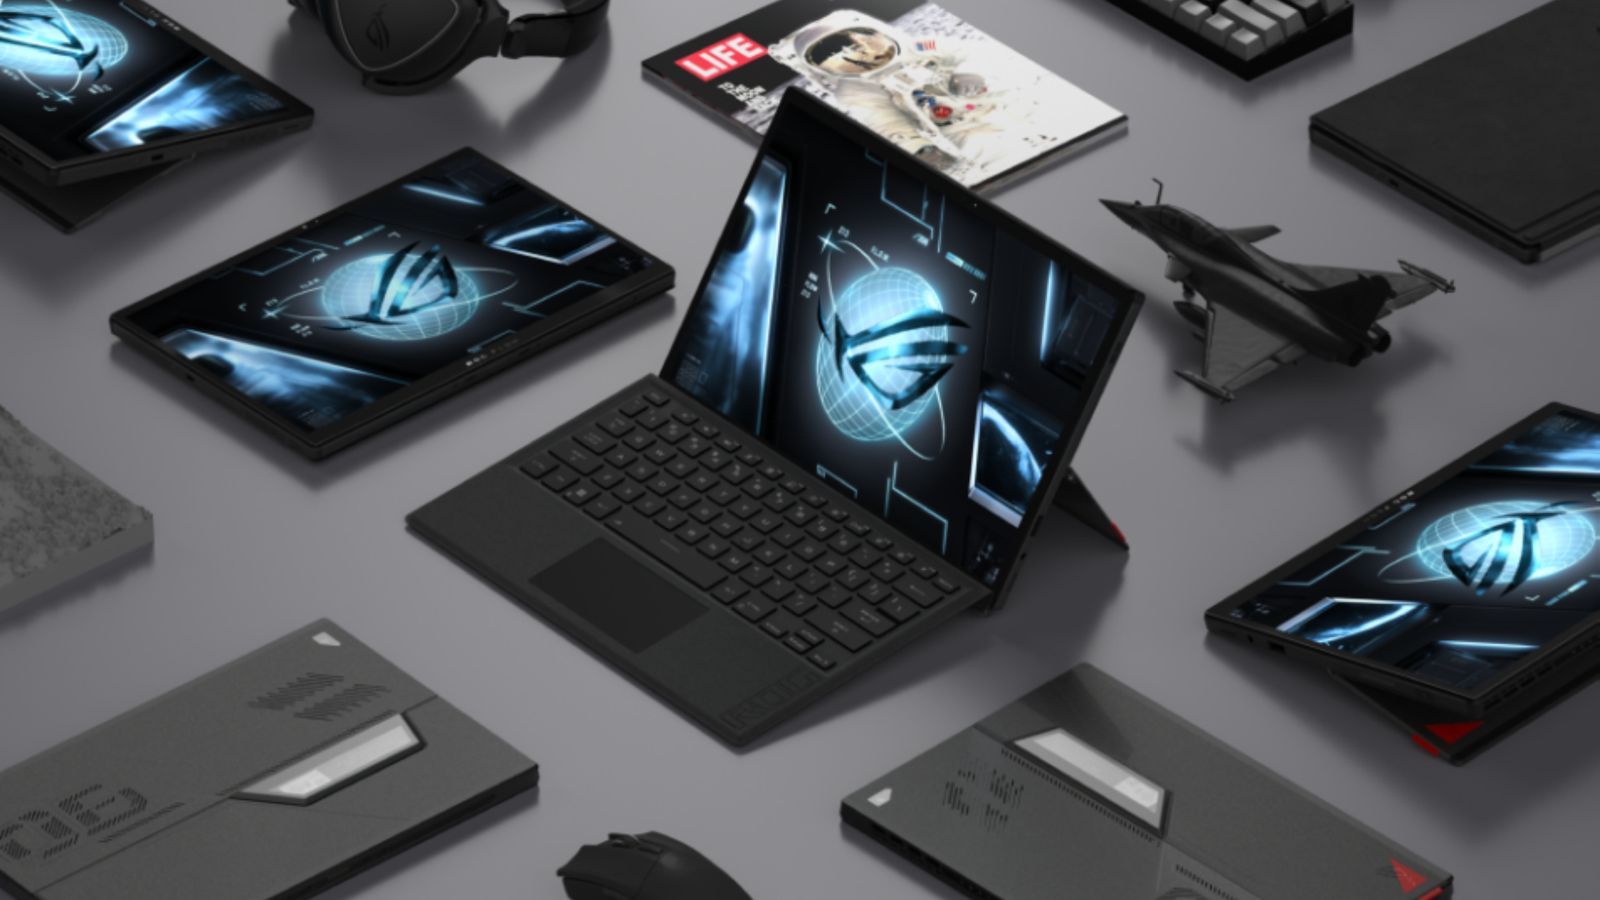 ASUS ROG Flow Z13 product image of the laptop propped up in the centre surrounded by other laptops folded into tablets, a magazine, and a small black jet model.